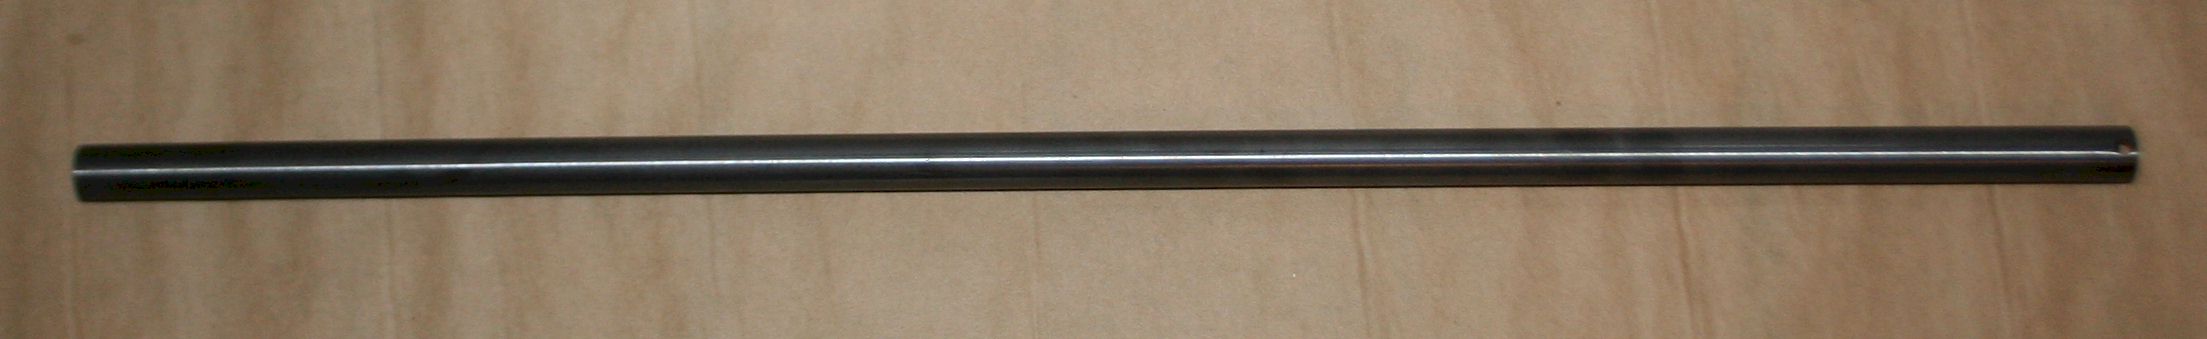 Magazine tube EXTRA LONG 30 inch LARGE cal 30/30, .38, .44 cal Winchester 1866 1873, 1892, 1894, 64, 53 and Marlin